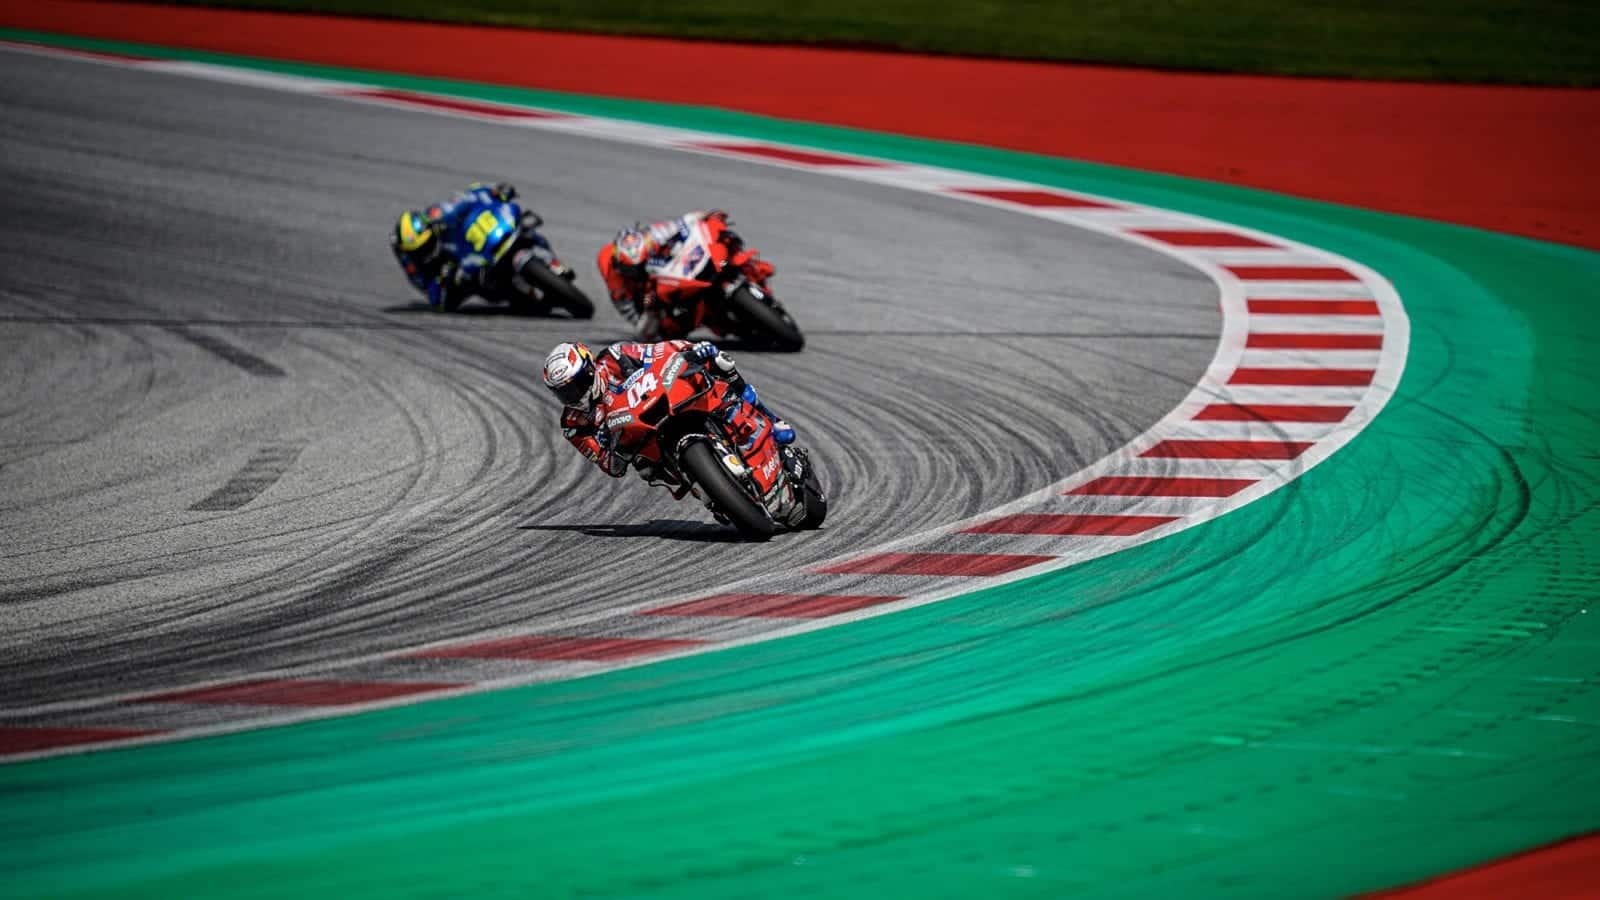 Andrea Dovizioso Jack Miller and Joan Mir during the 2020 MotoGP Austrian Grand Prix at the Red Bull Ring